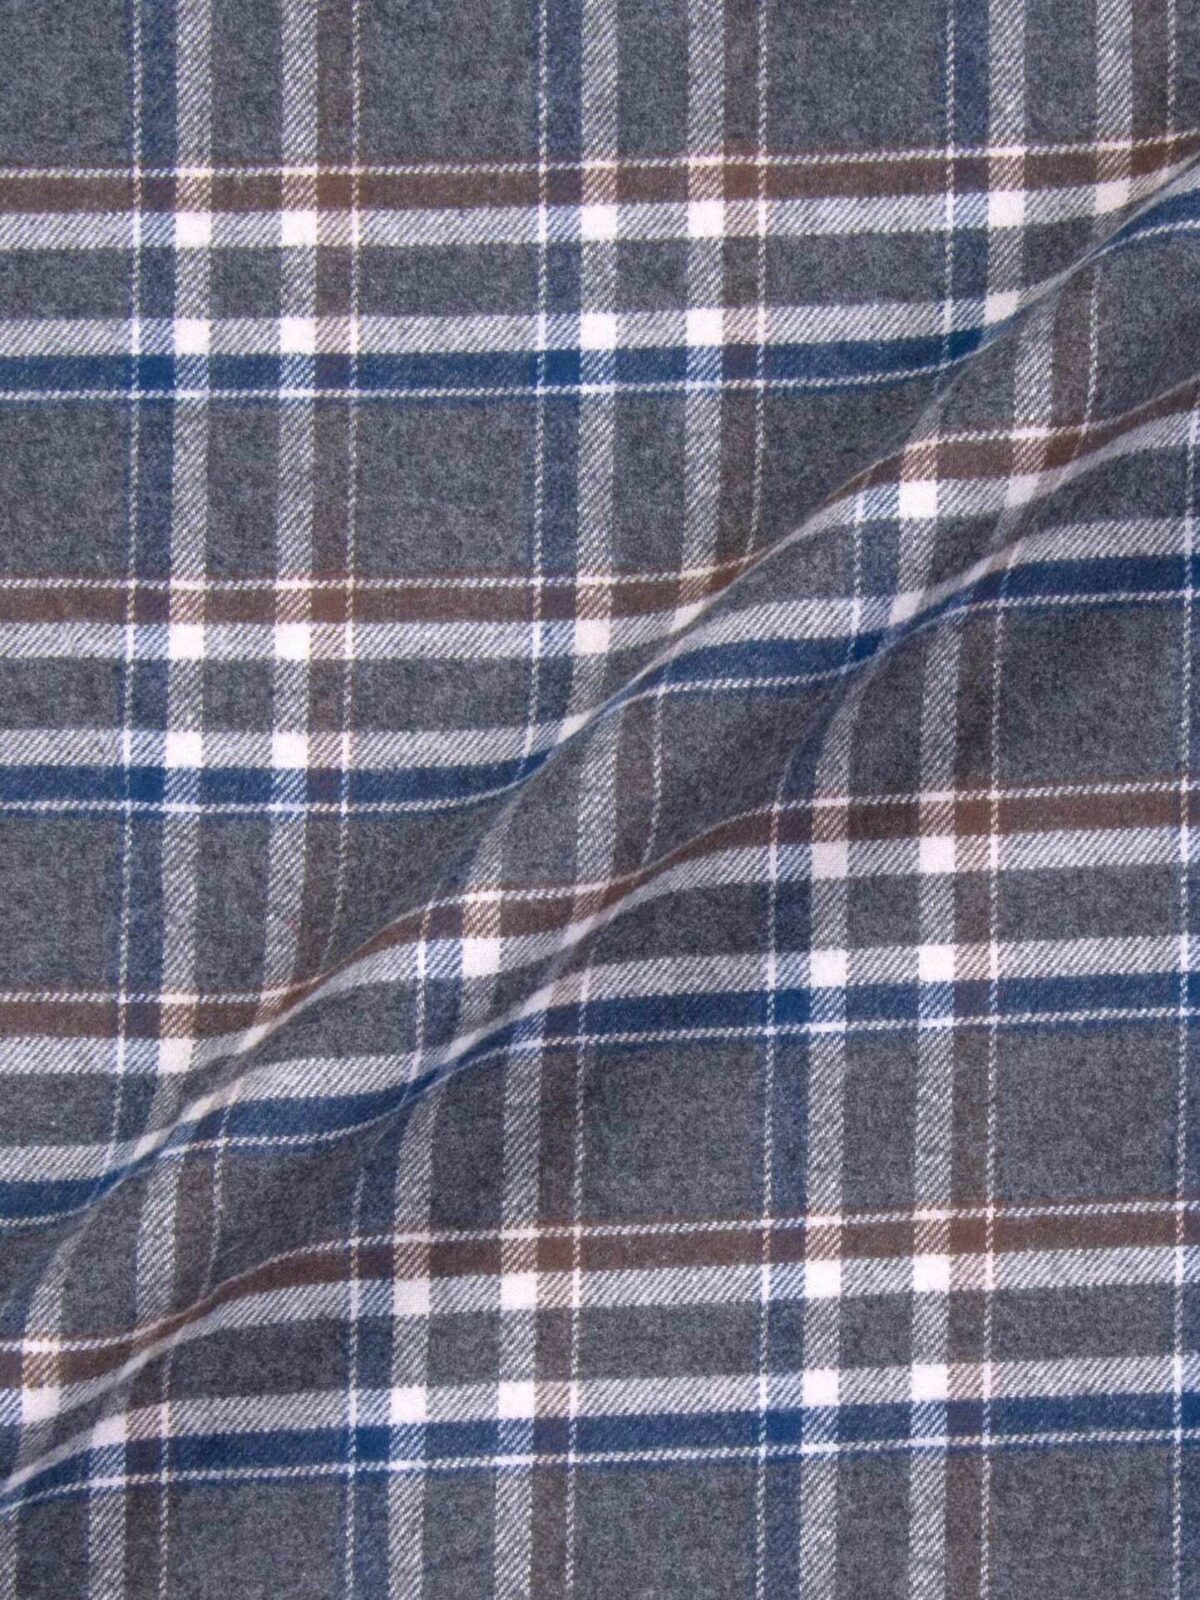 NEW Count Nathaniel Plaid Tartan Upholstery Fabric in Gray